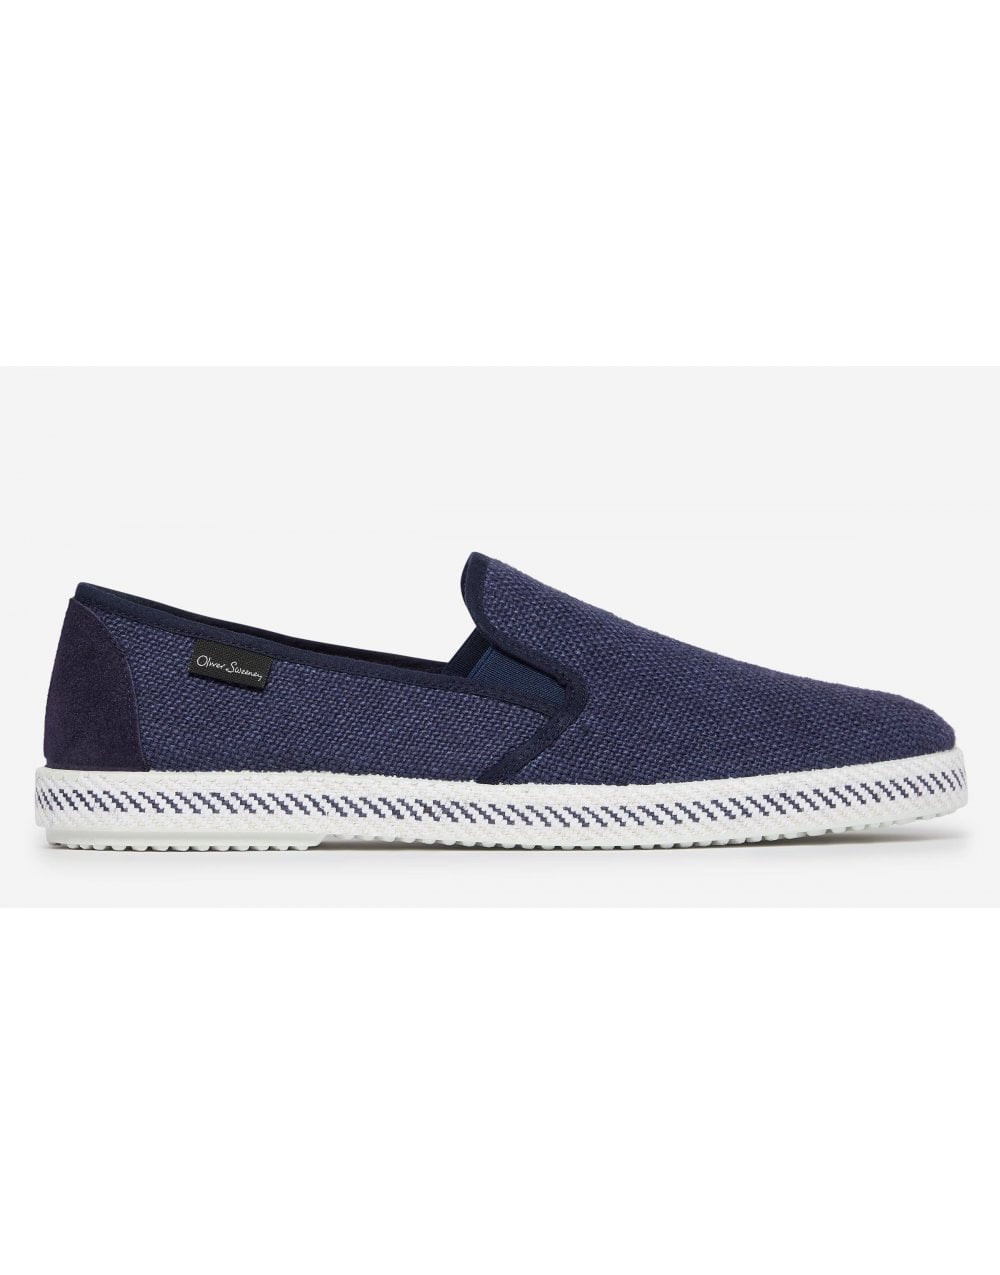 Oliver Sweeney Oliver Sweeney Campomar Woven Espadrilles Size: 8, Col: Navy